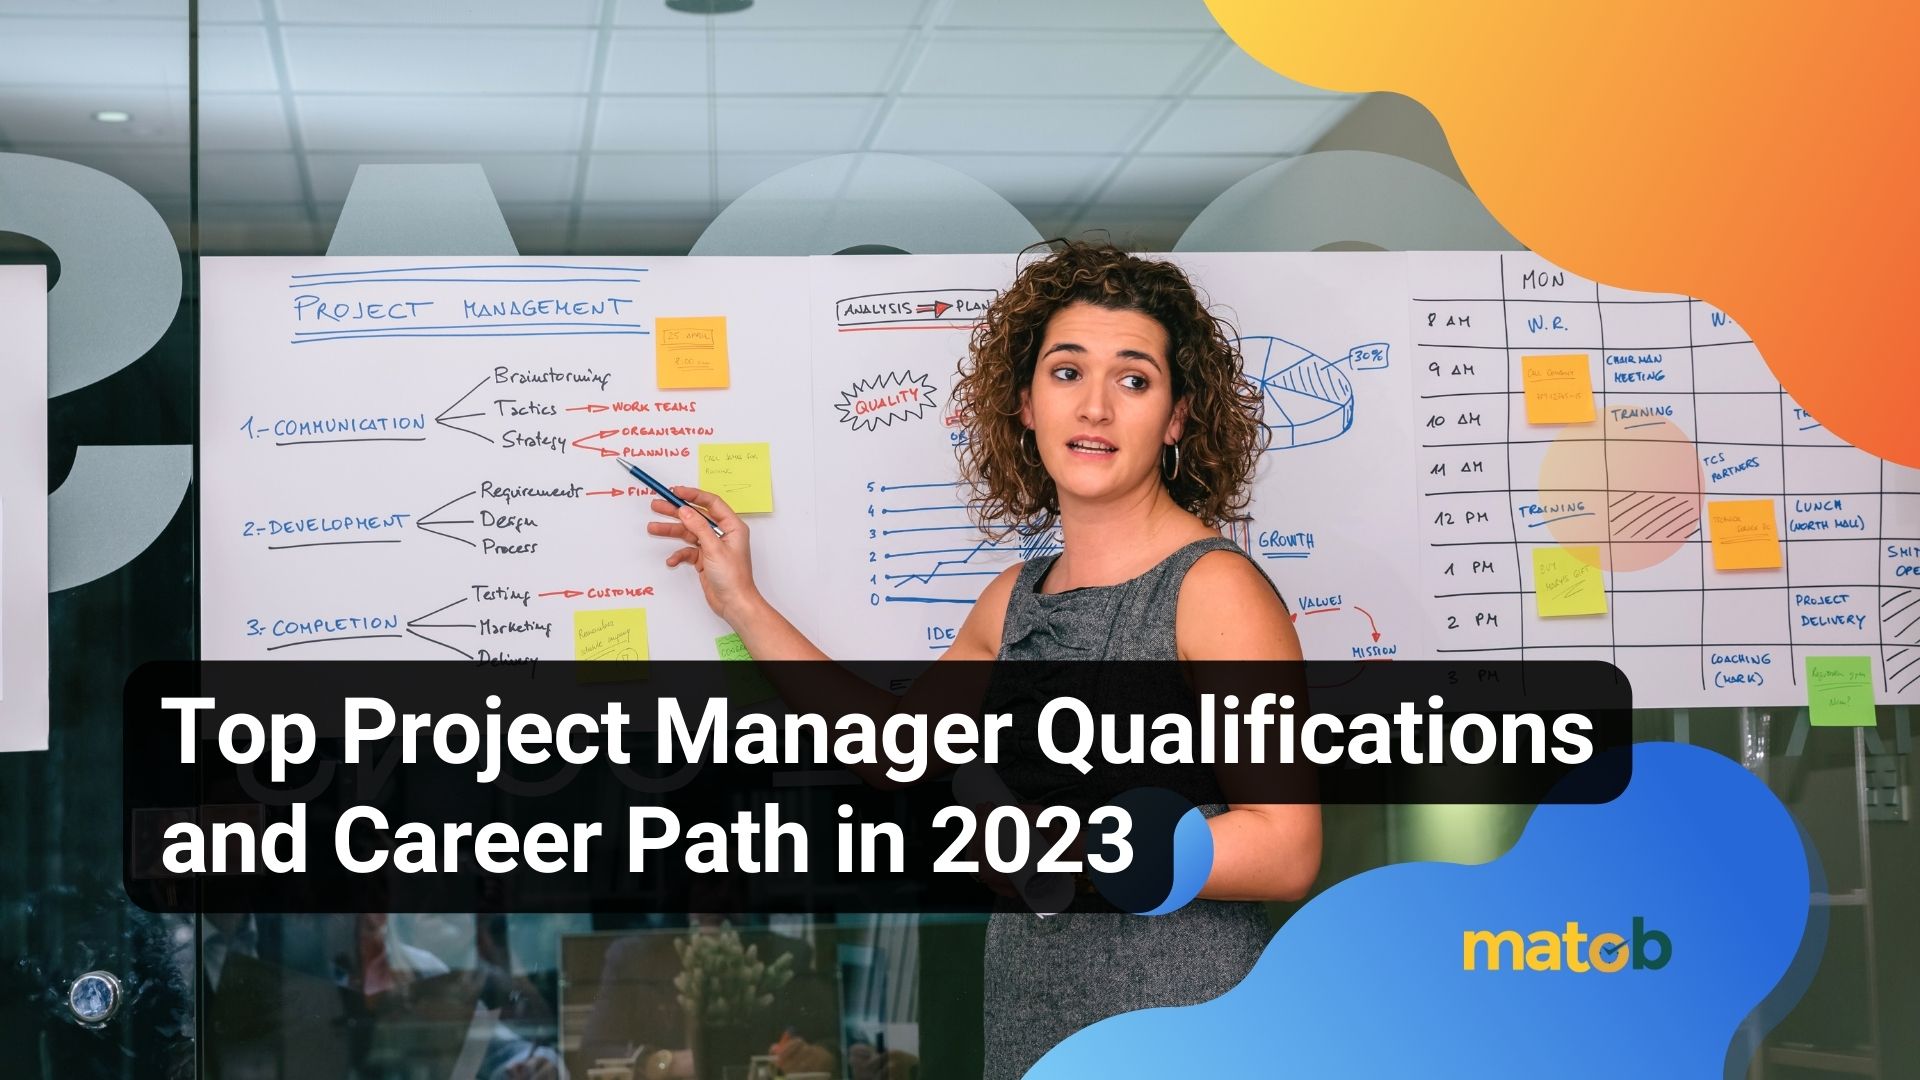 Top Project Manager Qualifications and Career Path in 2023